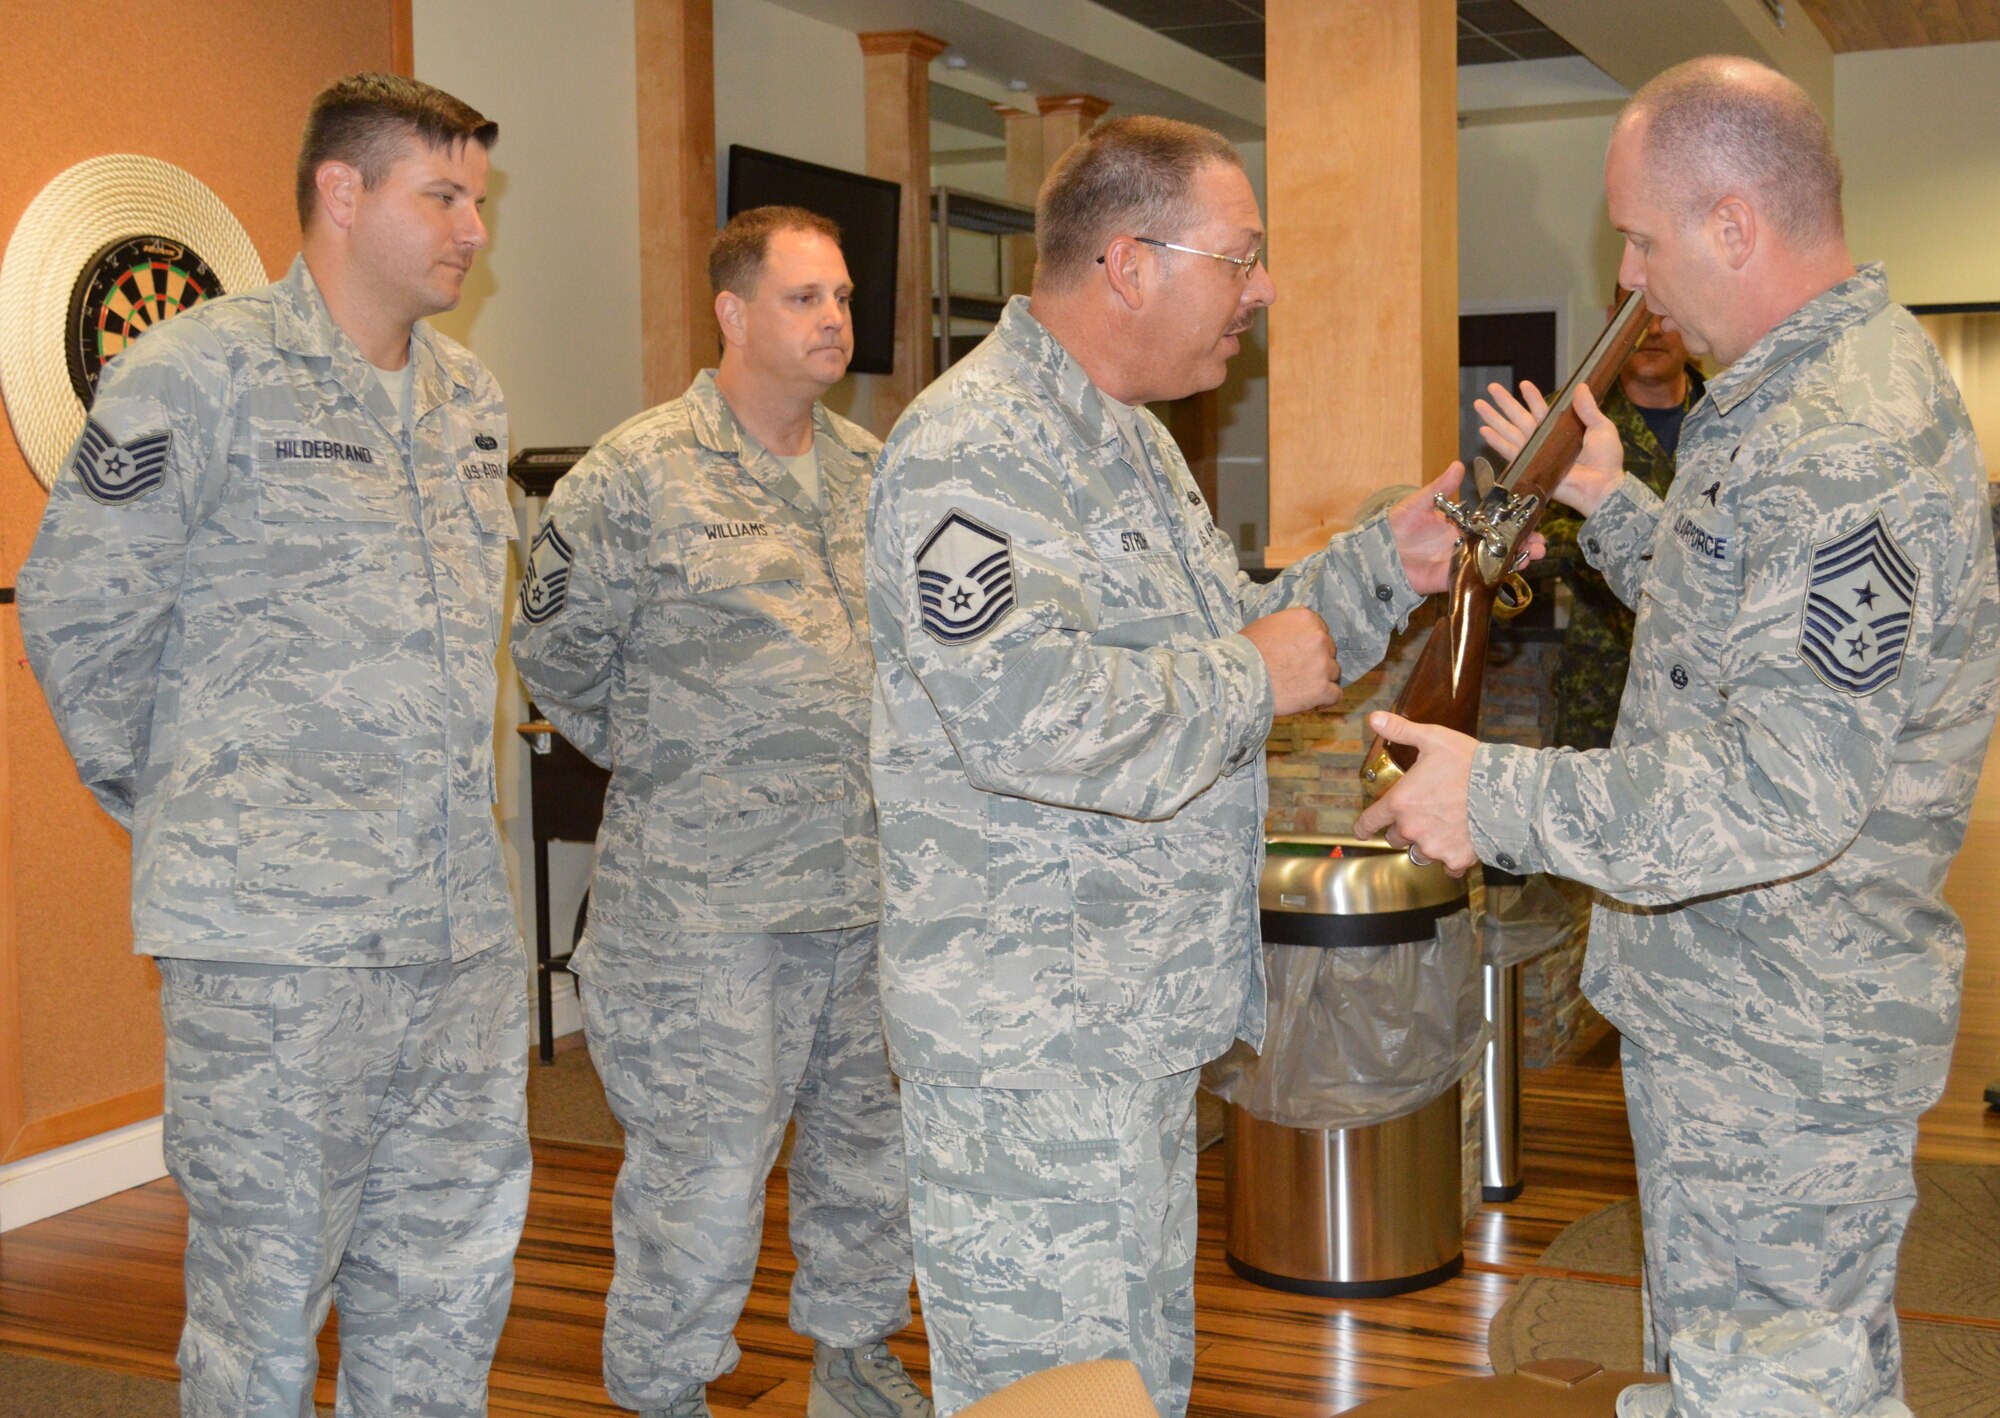 Tech. Sgt. Marcel  Hildebrand (left) and Senior Master Sgt. Paul Williams, Combined Enlisted Association members,  watch as Master Sgt. Todd Stroh, also a CEA member, explains some points about the replica musket’s trigger operation to Chief Master Sgt. James Hotaling, Air National Guard Command Chief. Hotaling was at 1st Air Force for a visit Oct. 9-10. (Photo by Mary McHale)